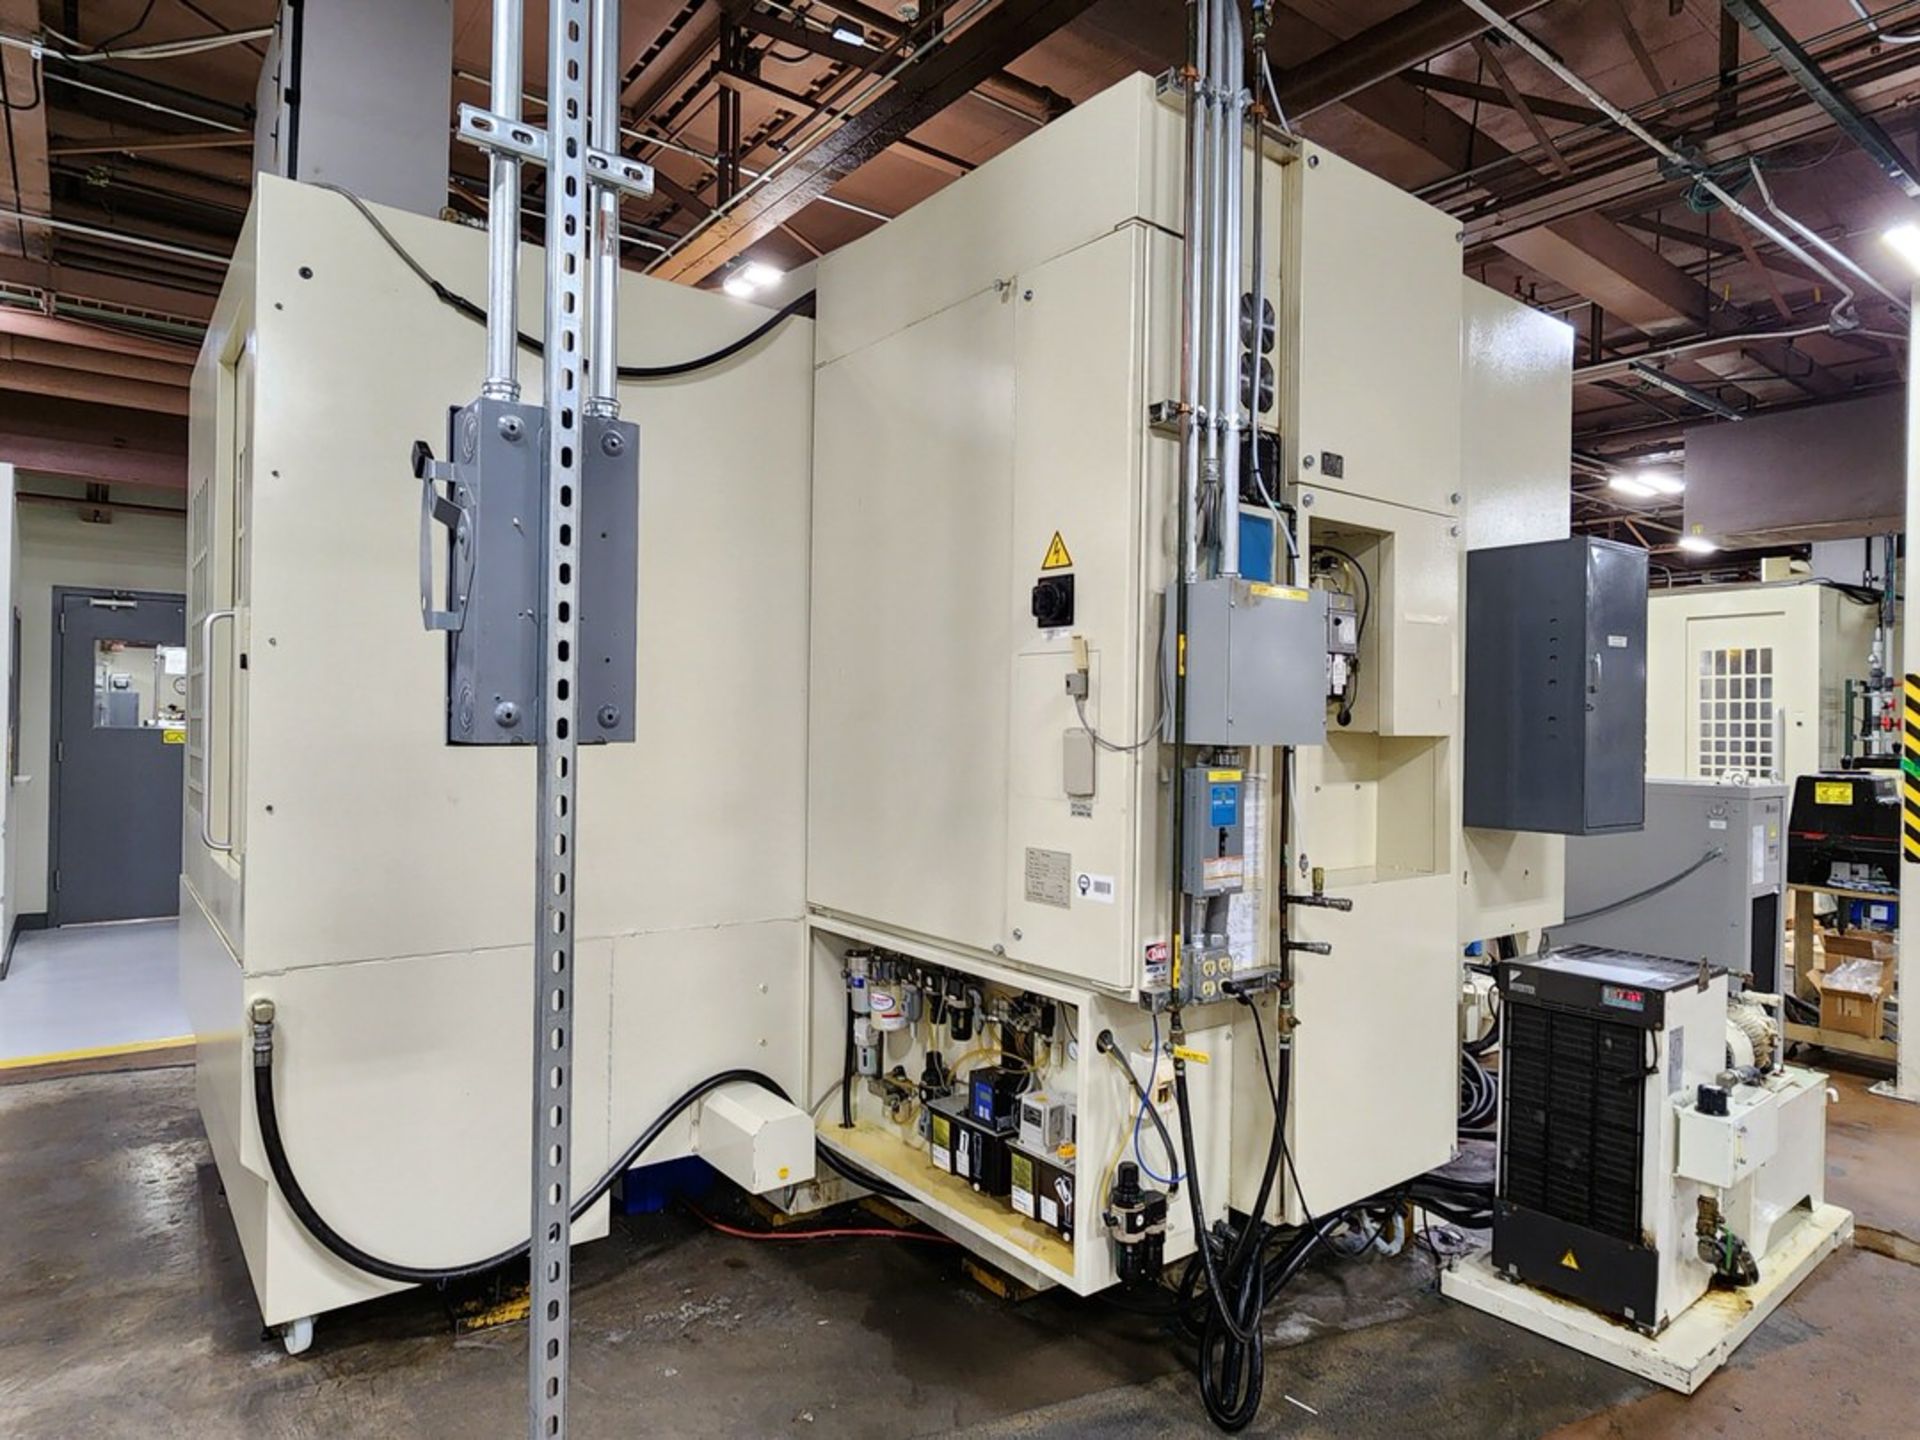 2008 Kitamura 7HiF Vertical Machining Center W/ Fanuc Series 16i-MB; 30,000 Spindle Speed; - Image 15 of 23